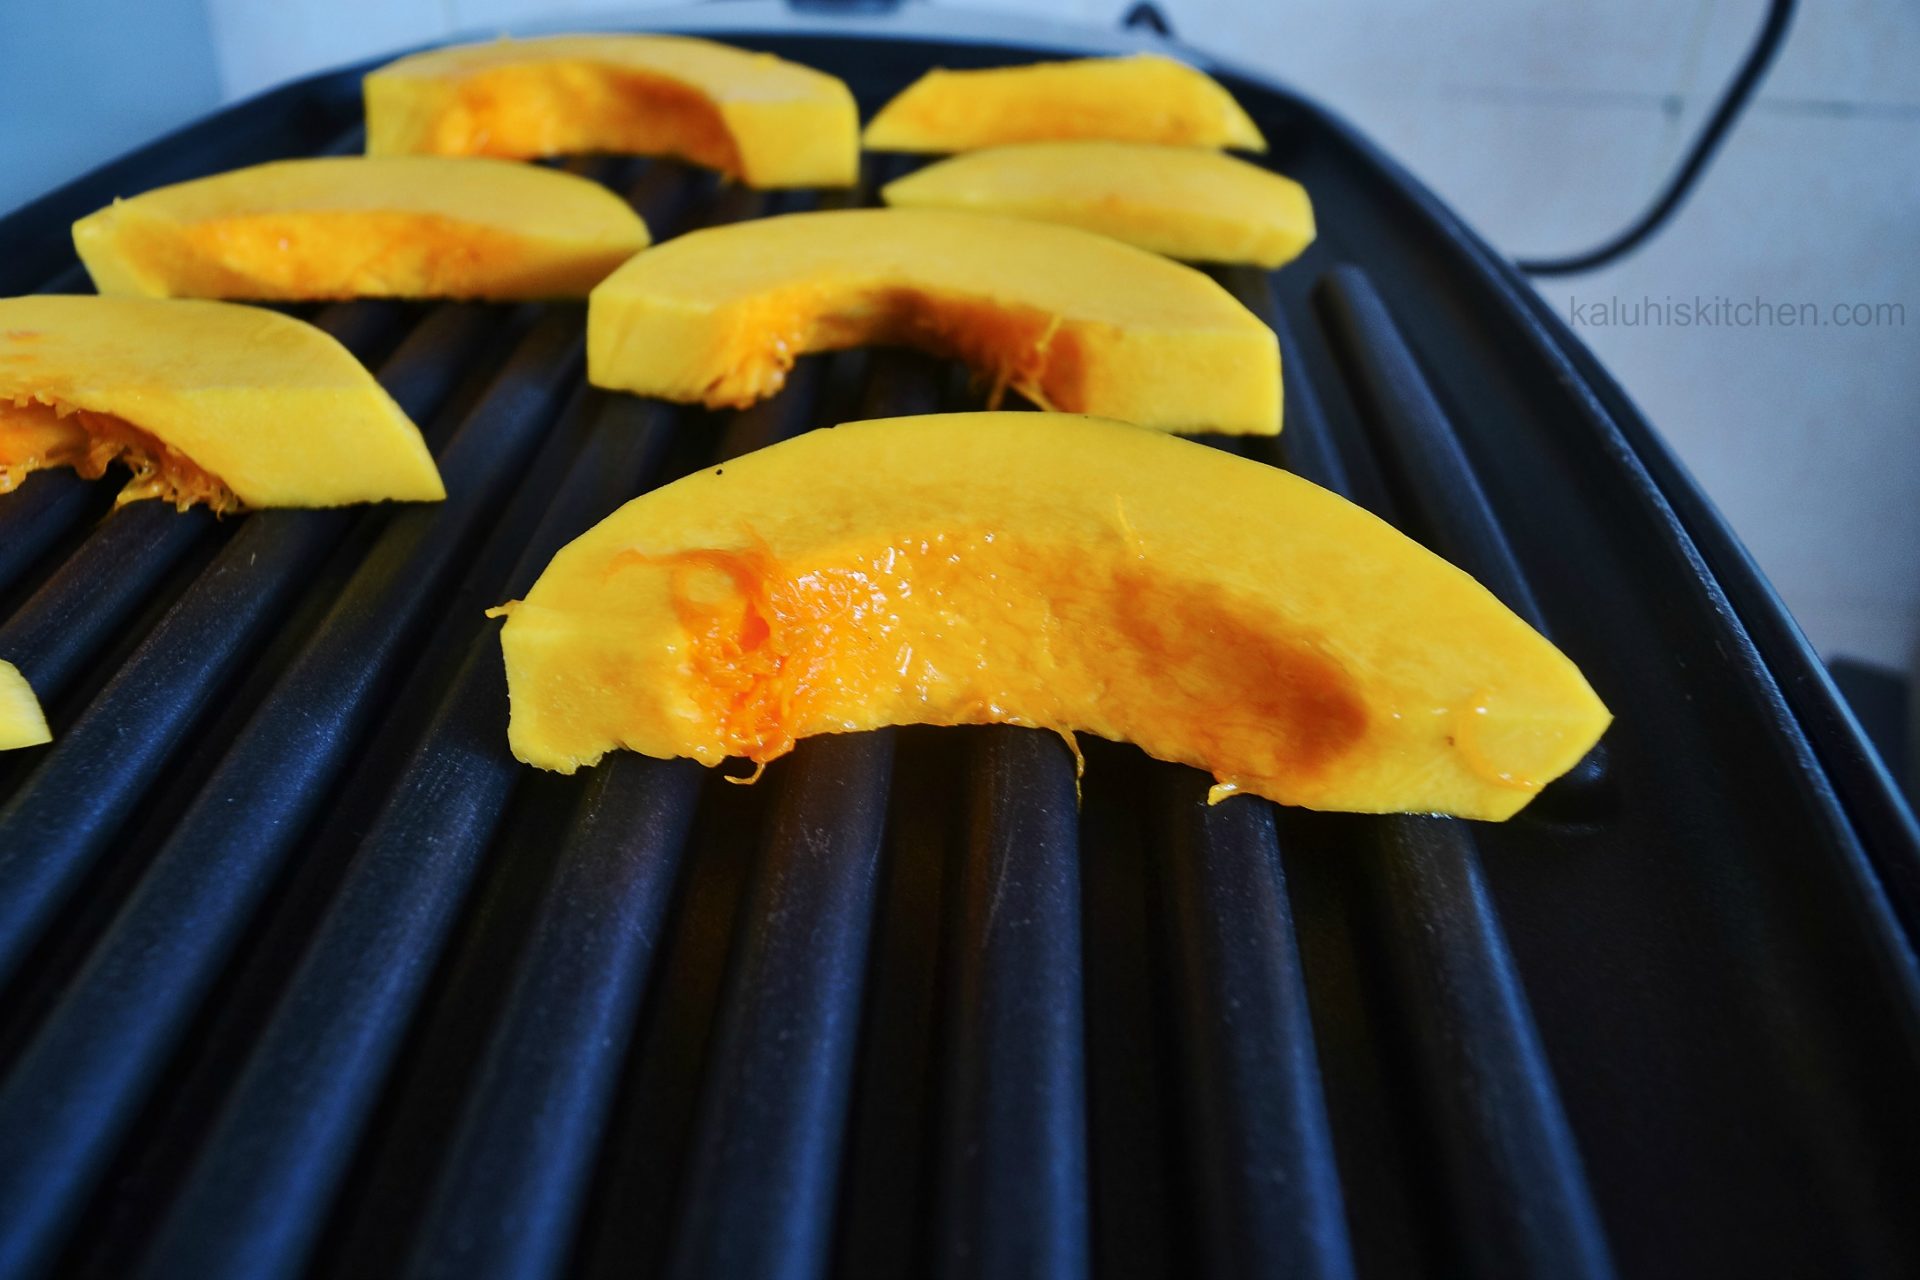 grilling the pumpkin develops the flavor and enhances the sweetnes making the end result very delicious_kaluhiskitchen.com